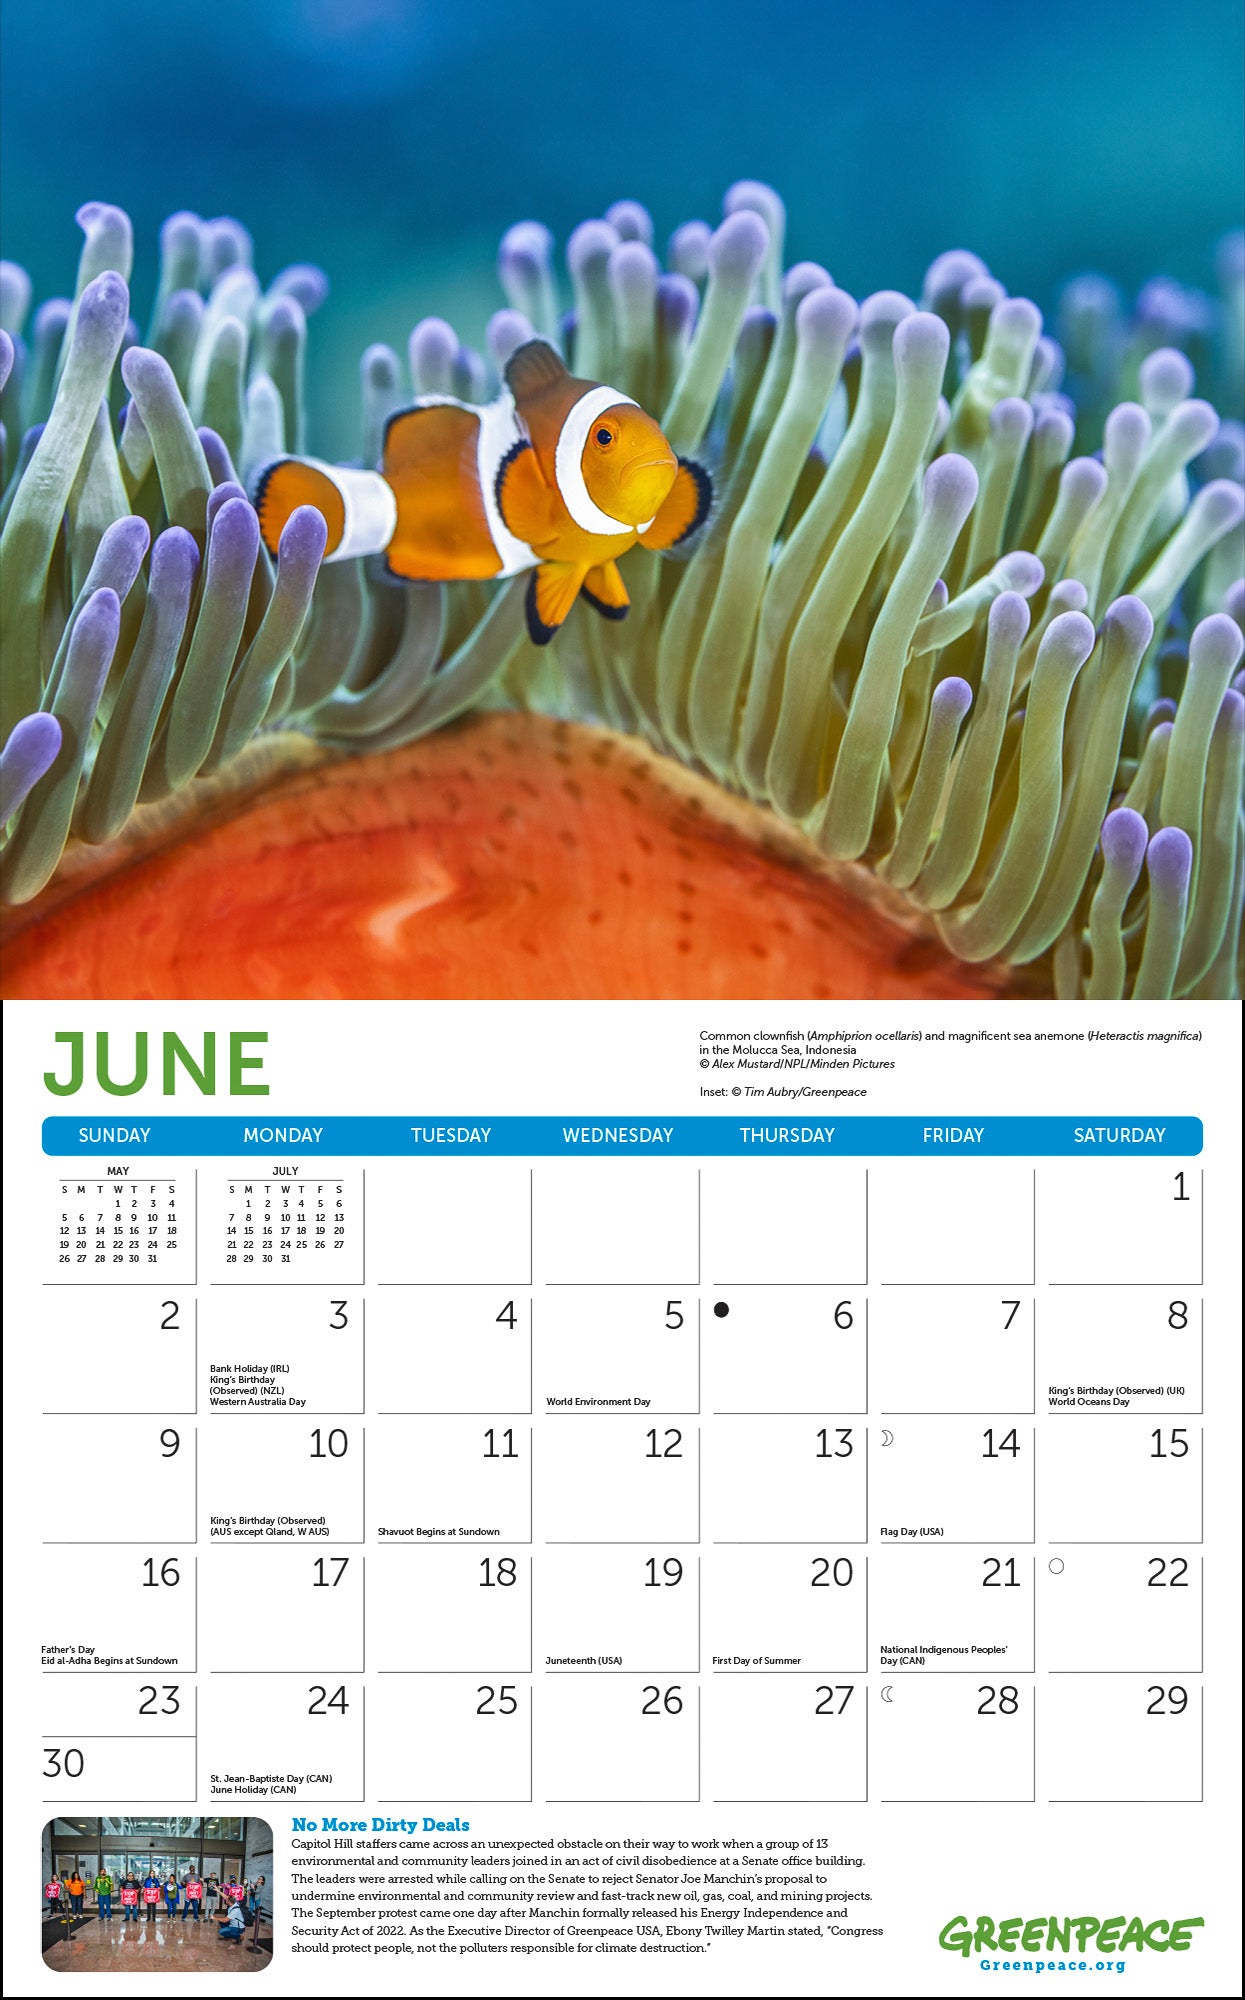 Tropical Fish Monthly 2024 Wall Calendar (12 x 12)